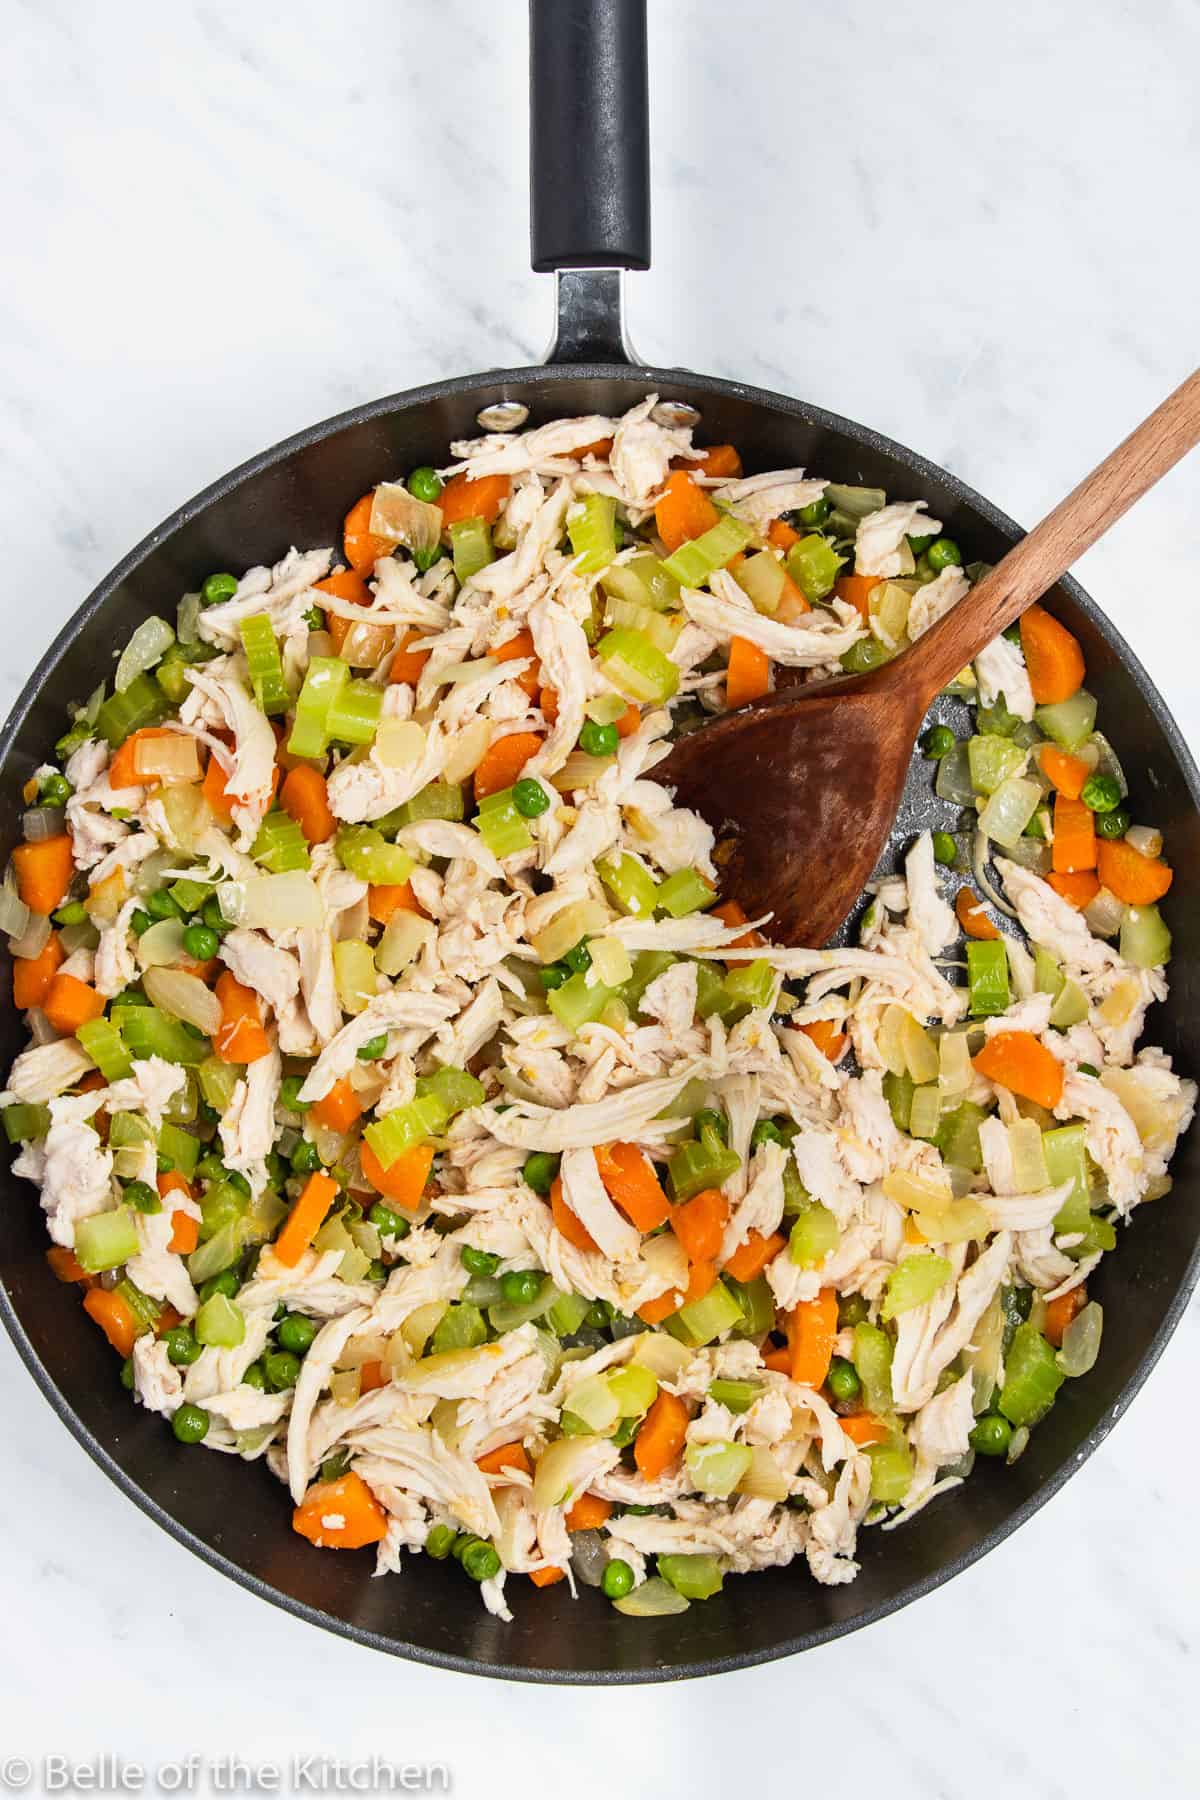 a skillet full of vegetables, chicken, and a wooden spoon.